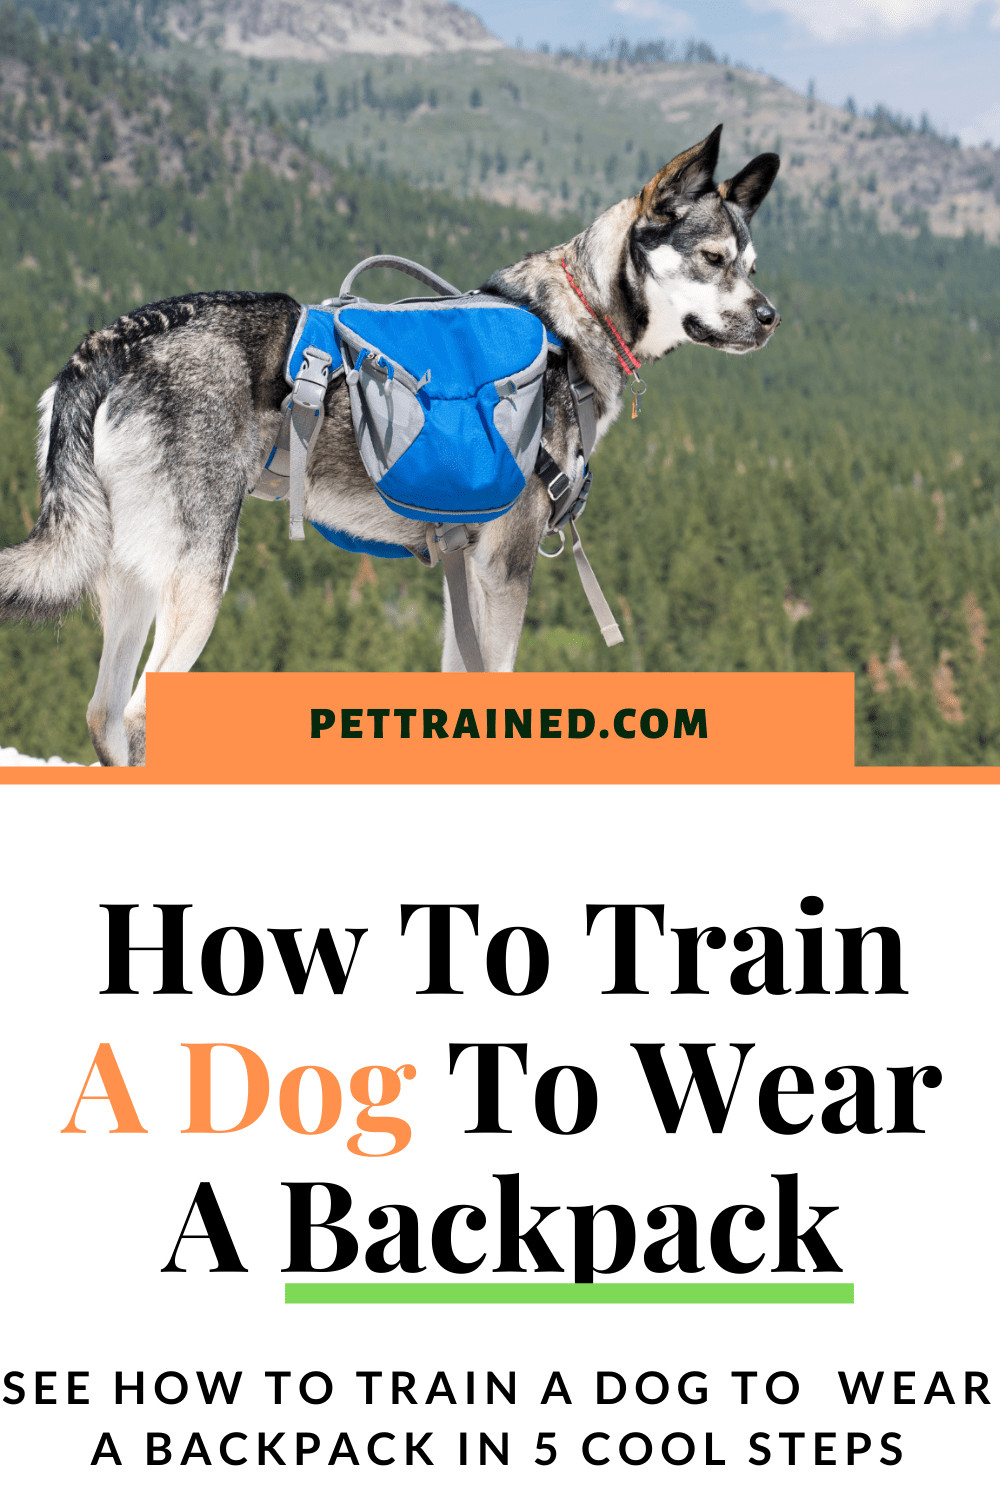 How to train a dog to wear a rucksack